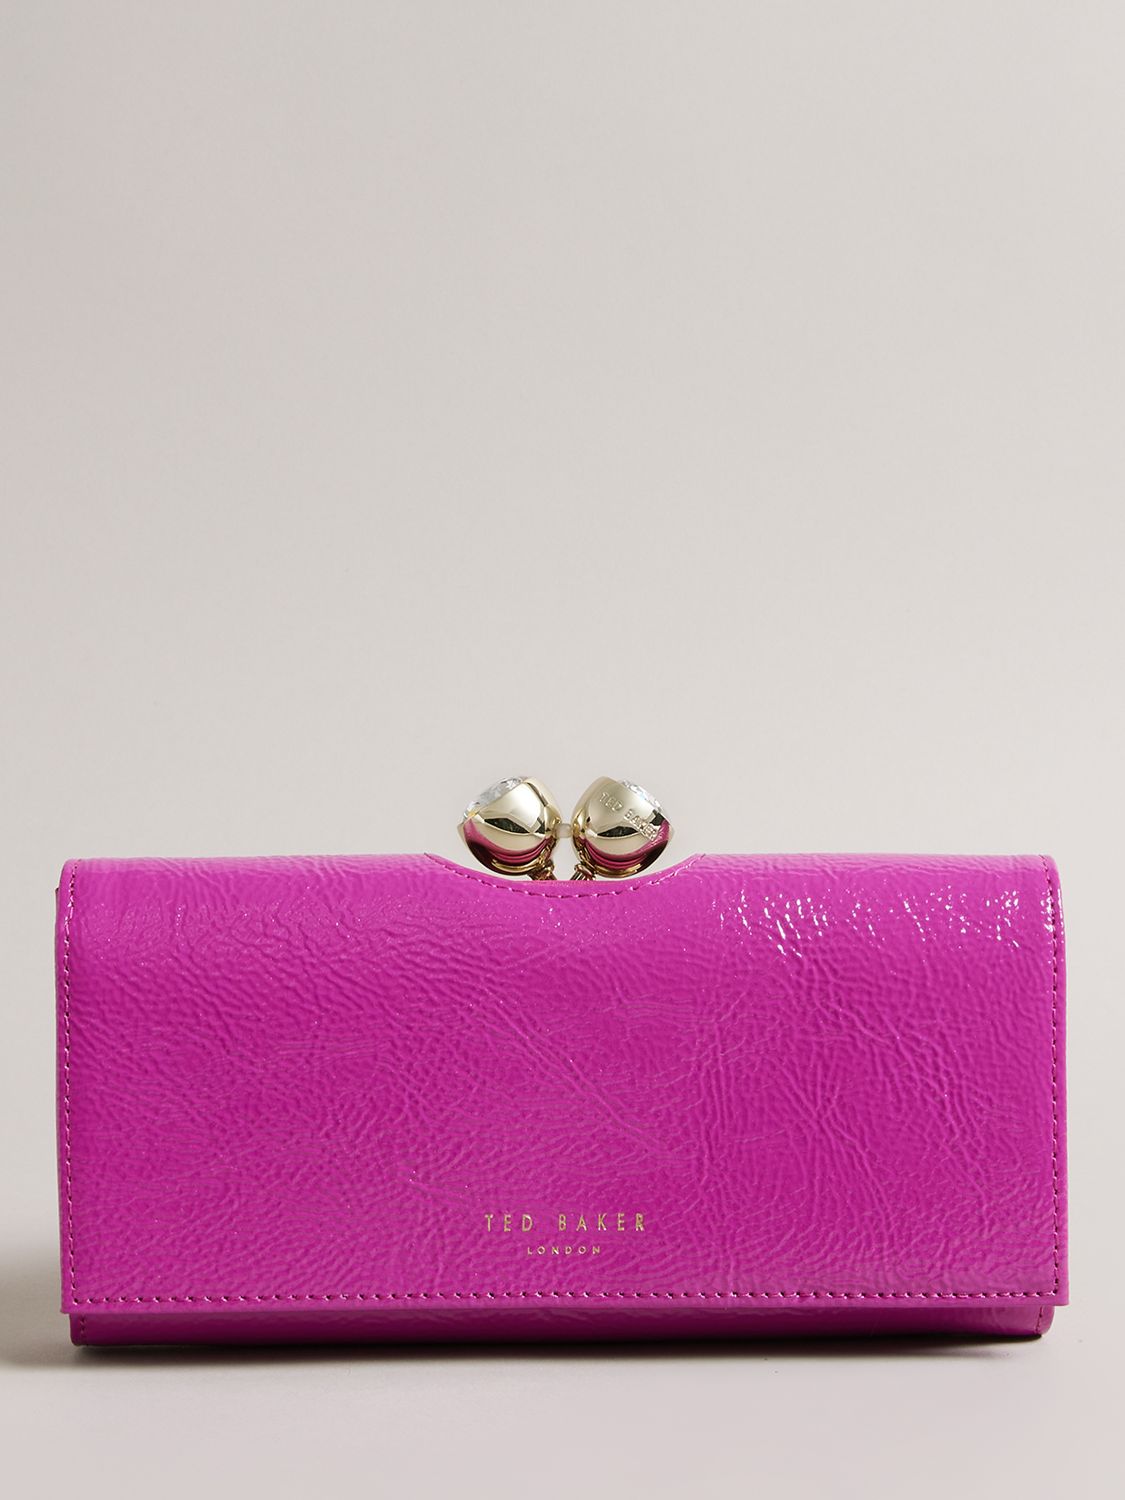 Ted Baker Rosyela Textured Leather Purse, Hot Pink at John Lewis & Partners